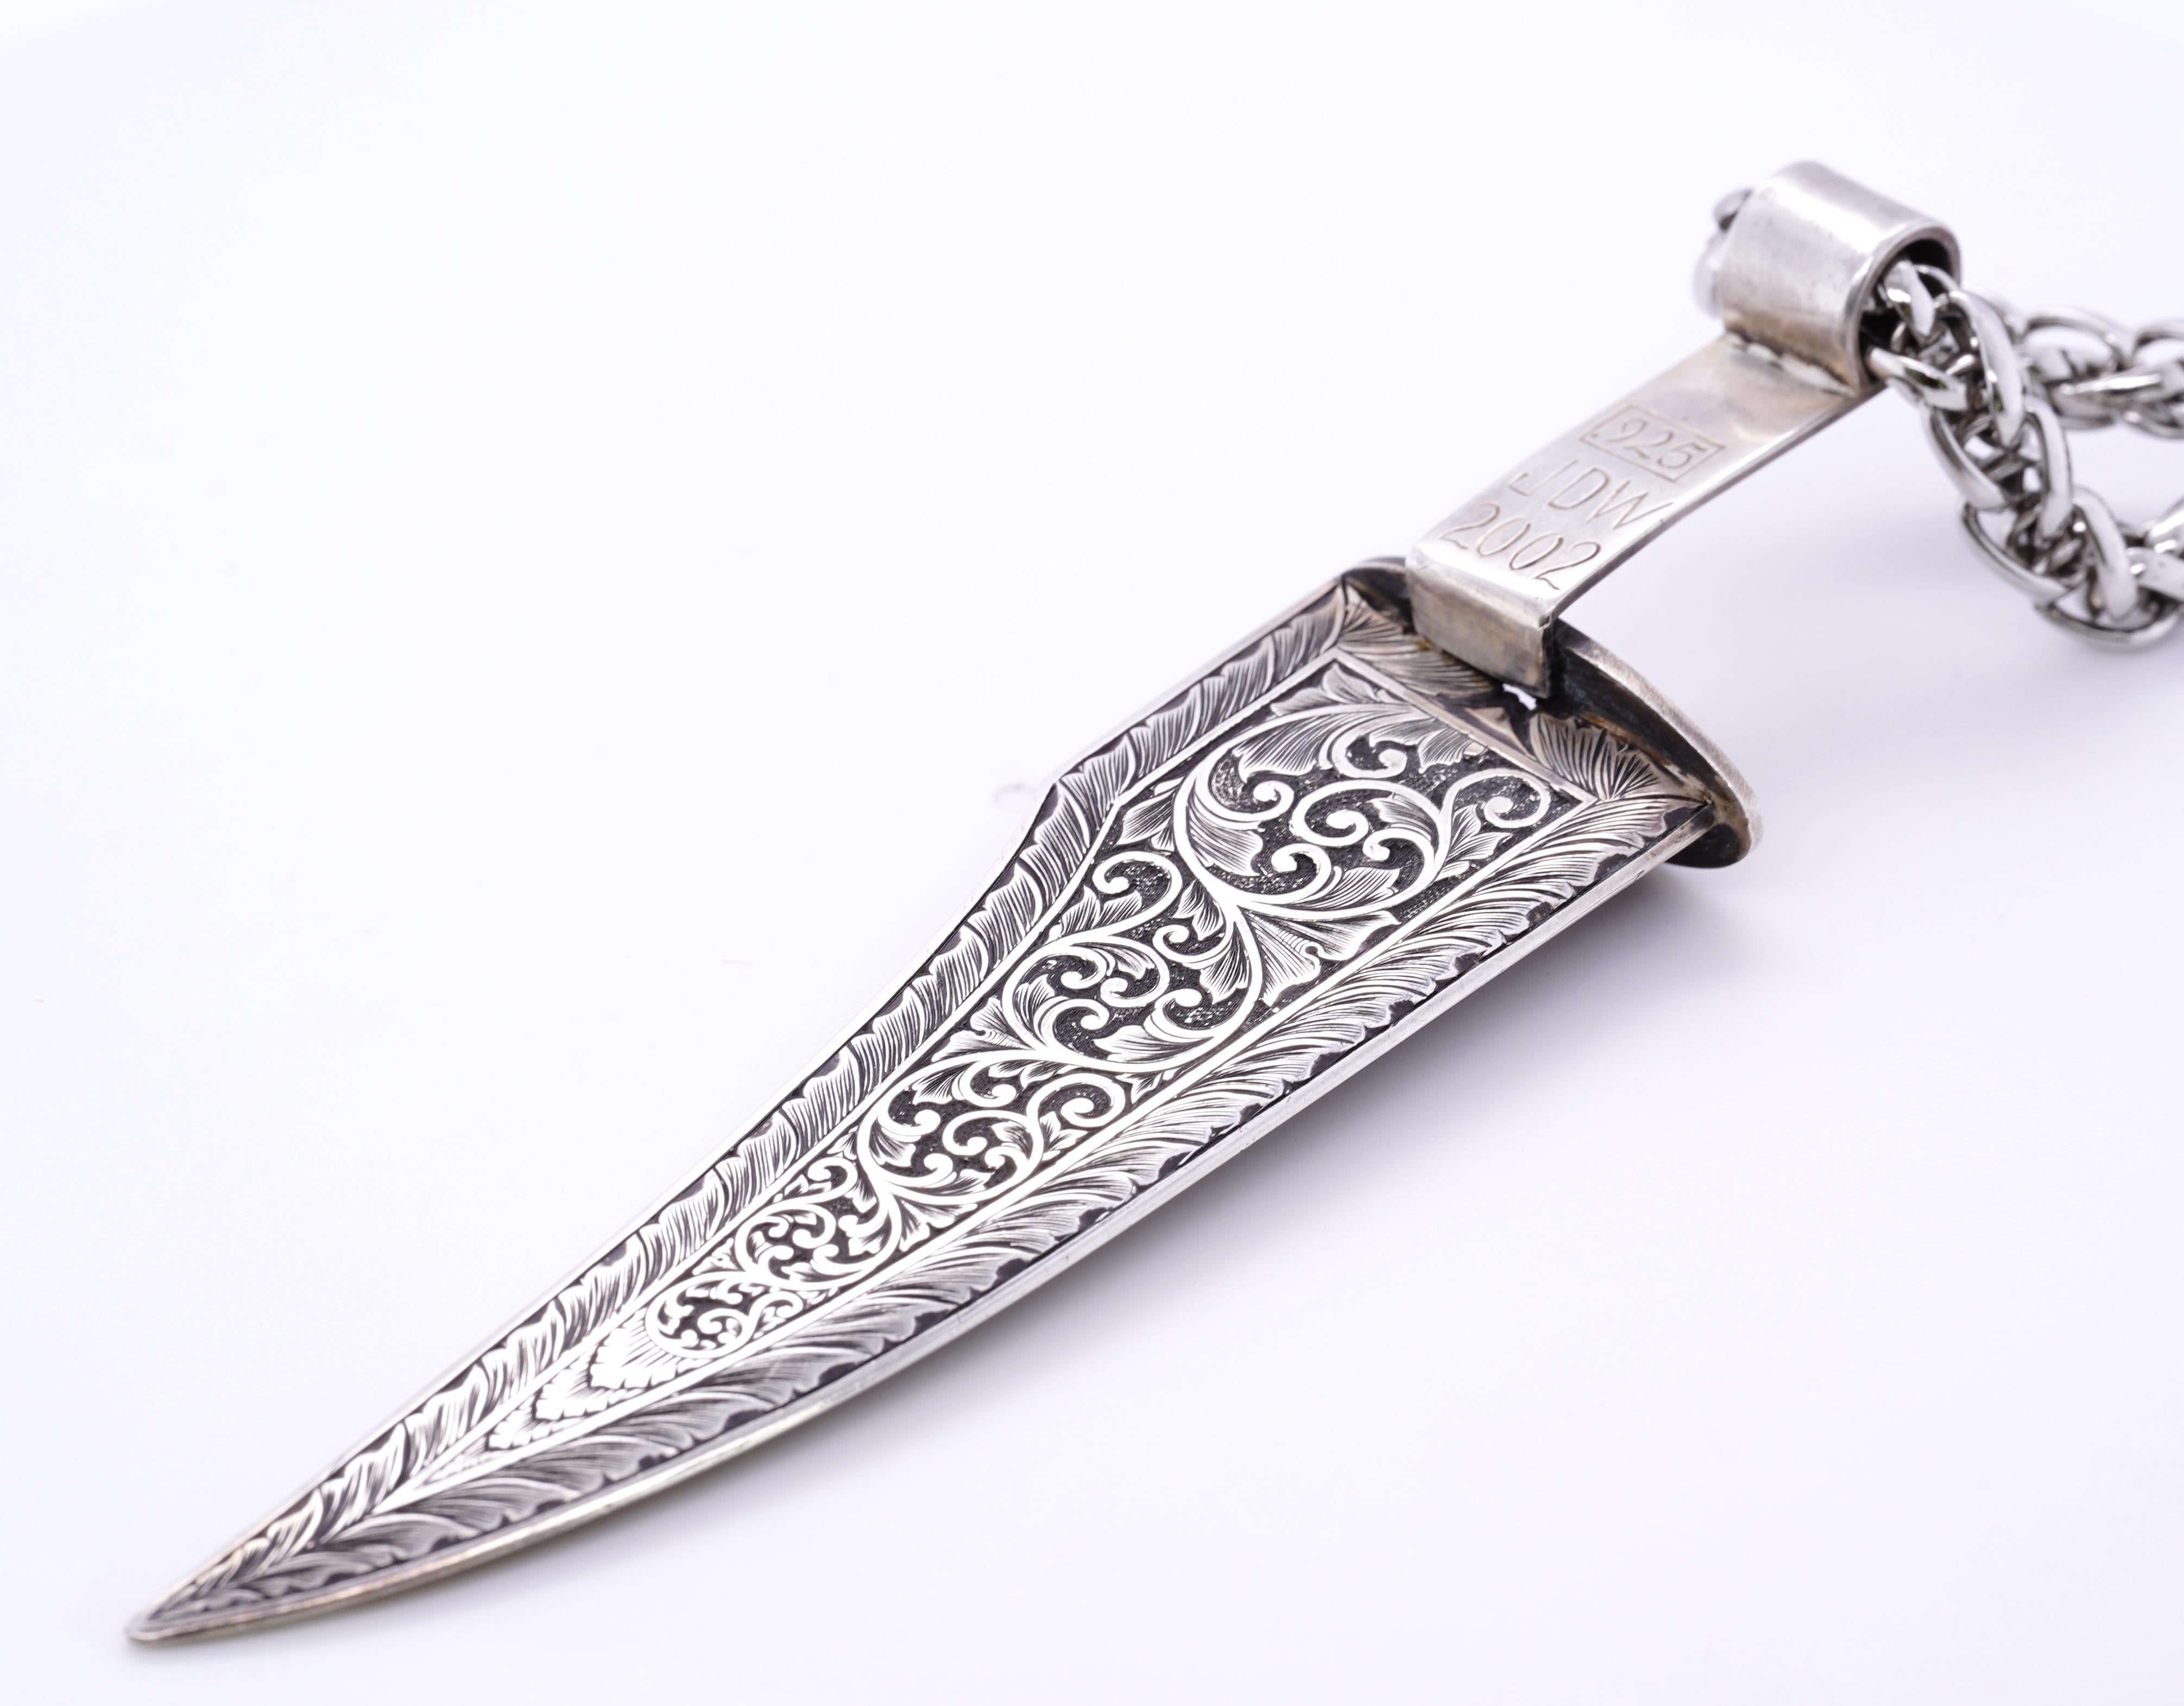 Mint, Miniature Bowie Knife with Sterling Silver Sheath by Jim Whitehead 7